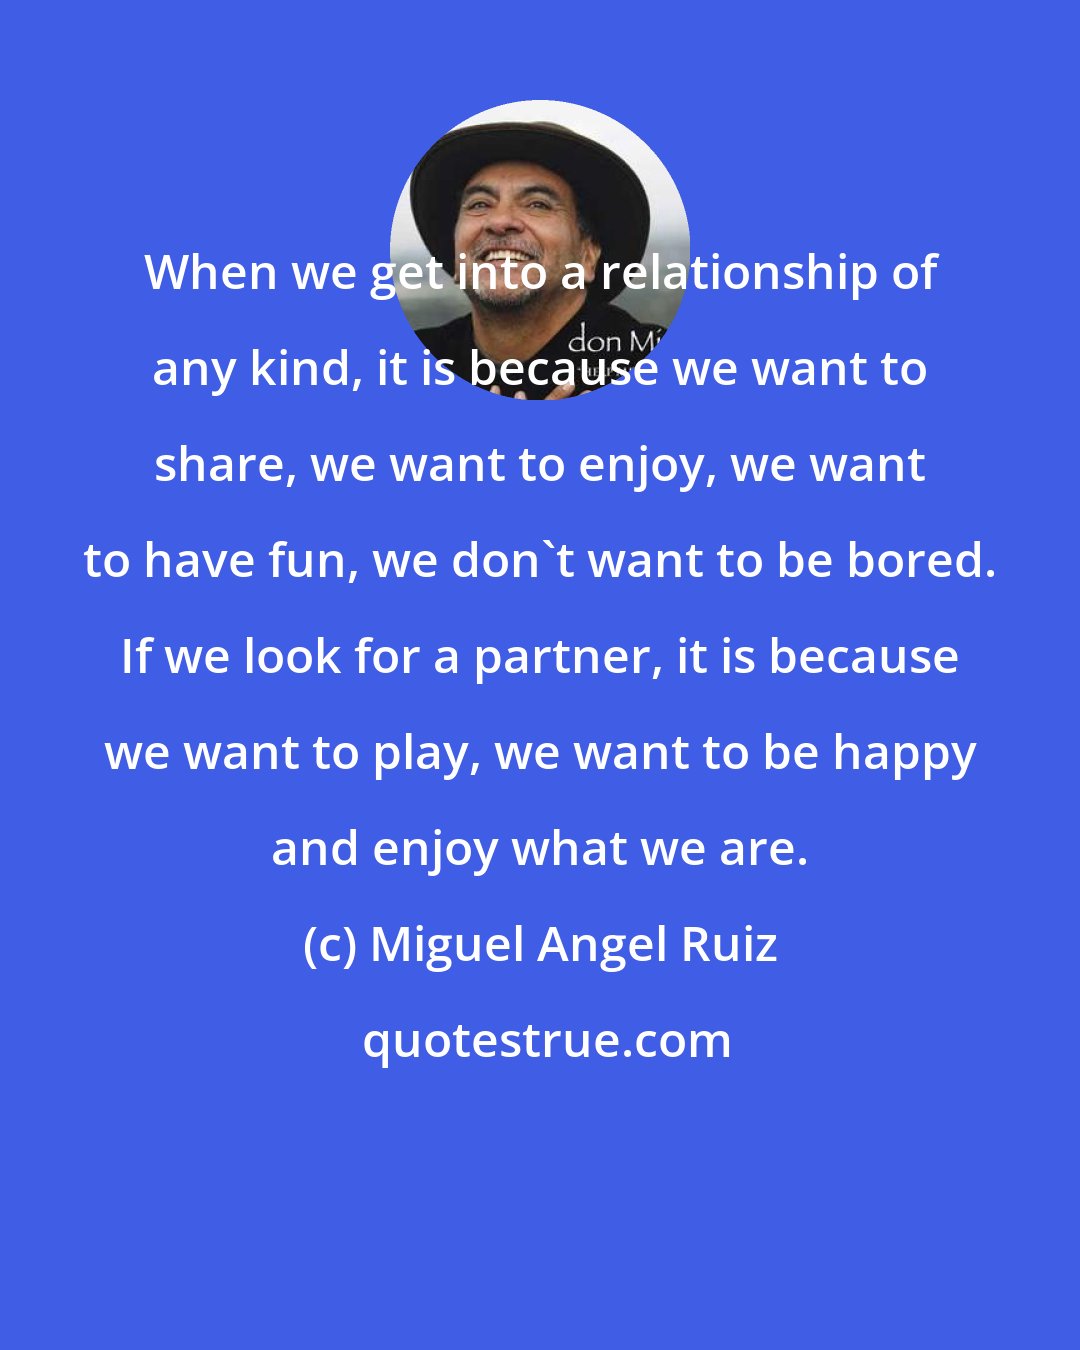 Miguel Angel Ruiz: When we get into a relationship of any kind, it is because we want to share, we want to enjoy, we want to have fun, we don't want to be bored. If we look for a partner, it is because we want to play, we want to be happy and enjoy what we are.